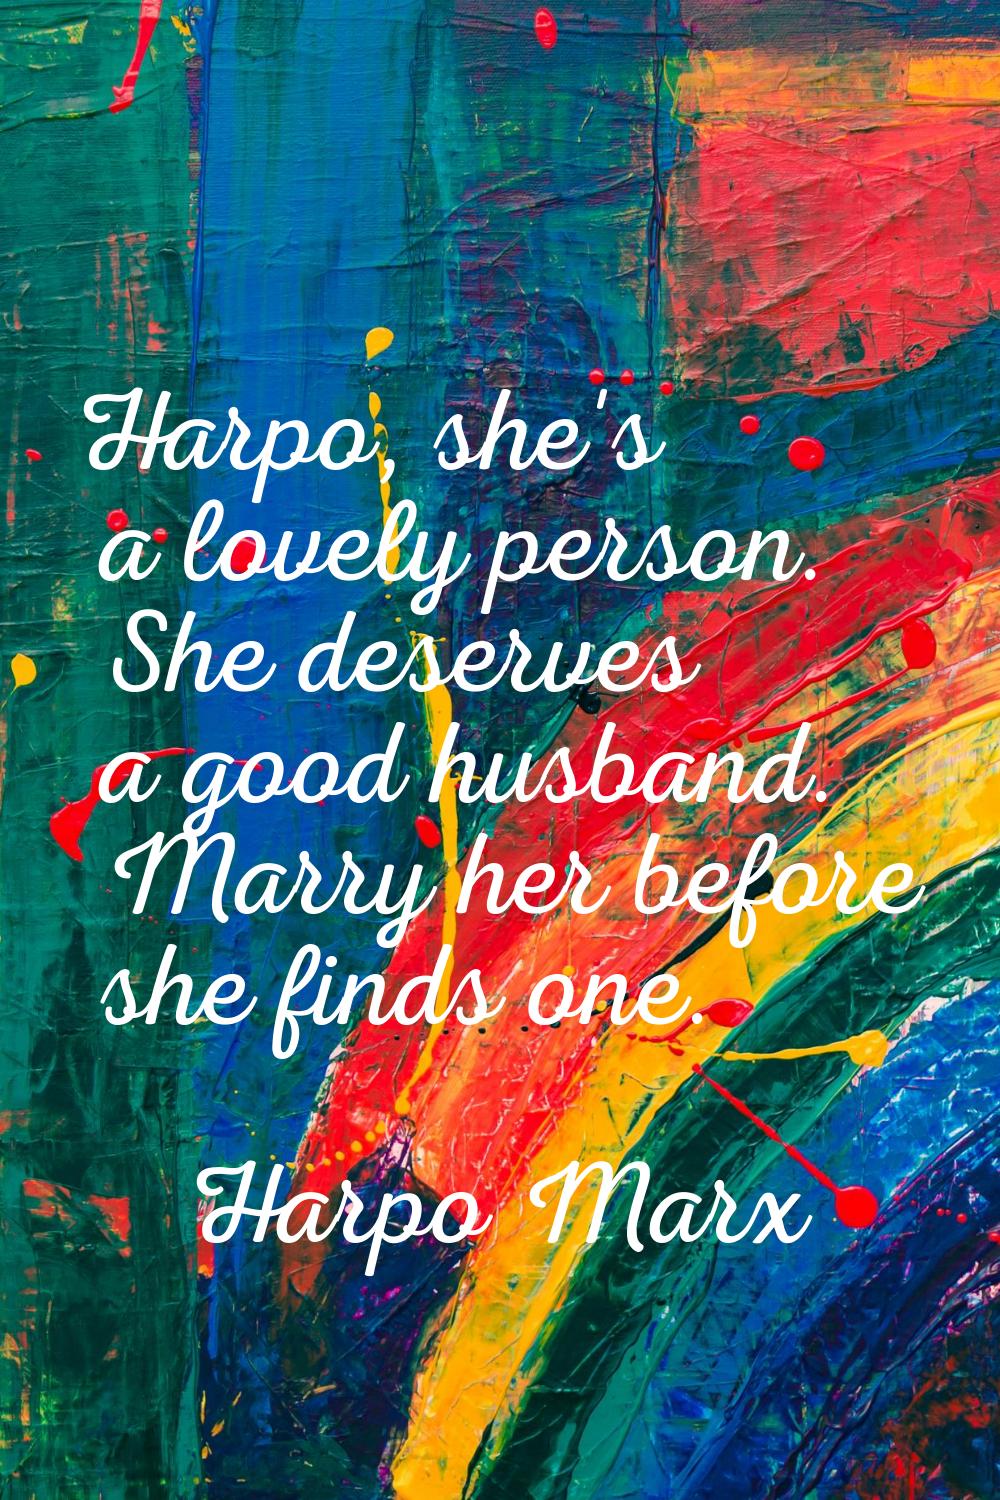 Harpo, she's a lovely person. She deserves a good husband. Marry her before she finds one.